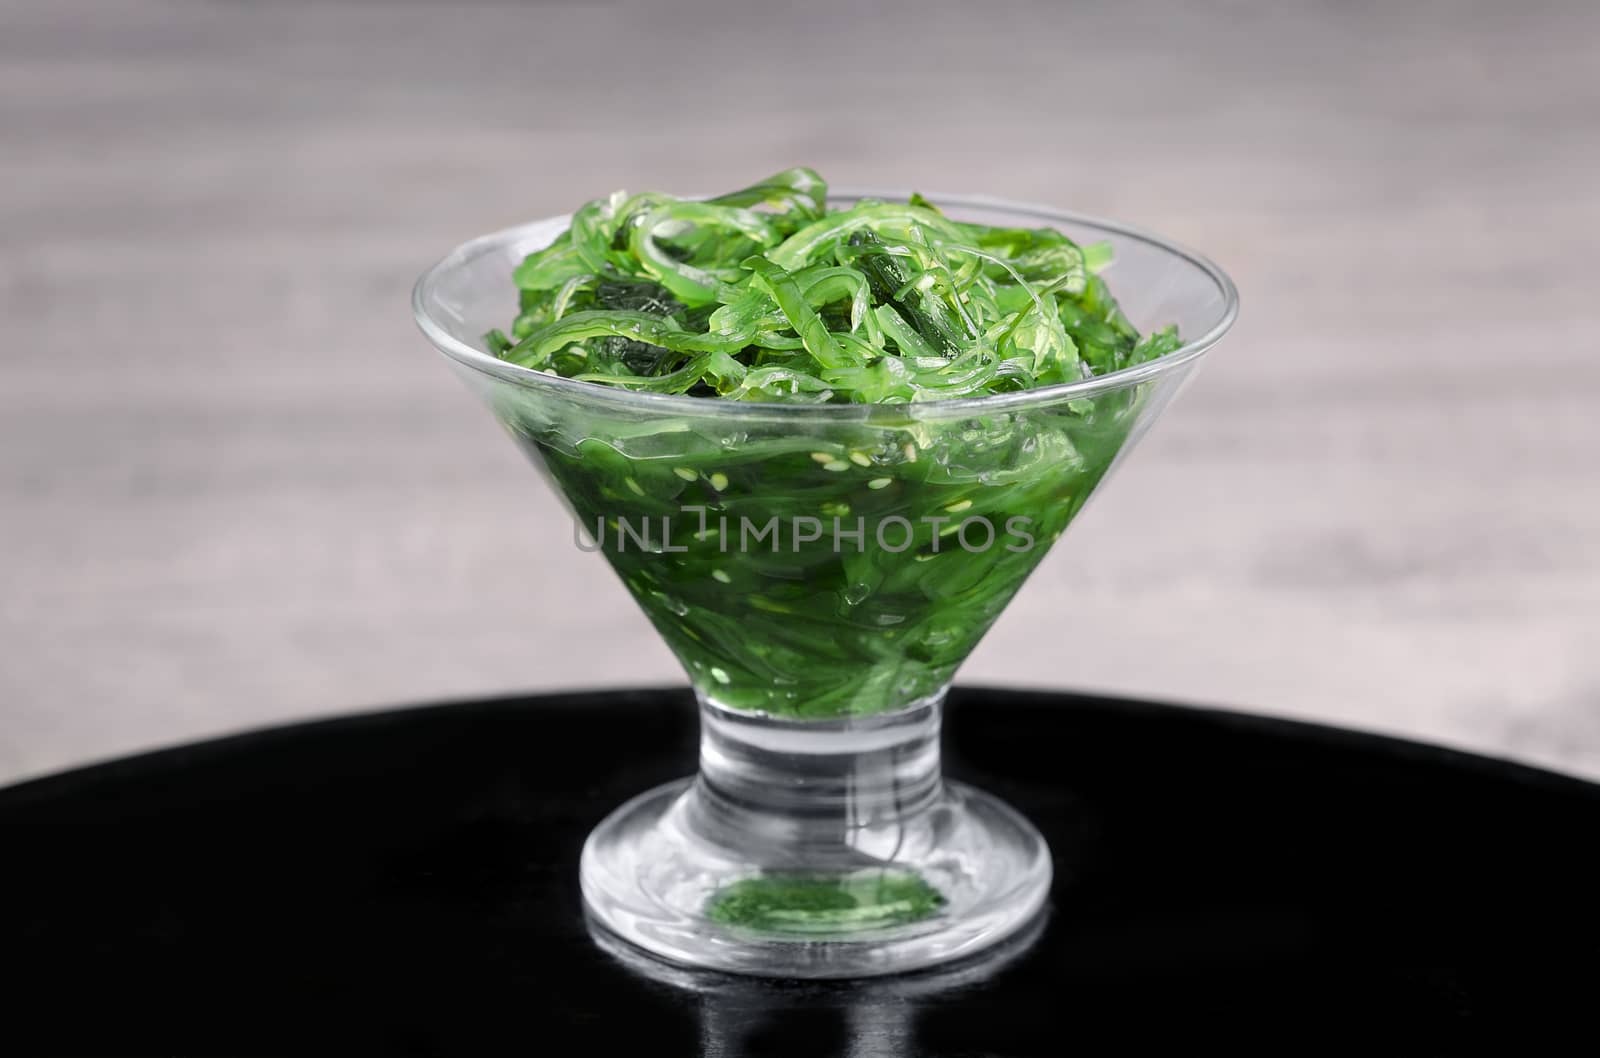 Seaweed in a glass vase, on a black surface and grey background. Selective focus.